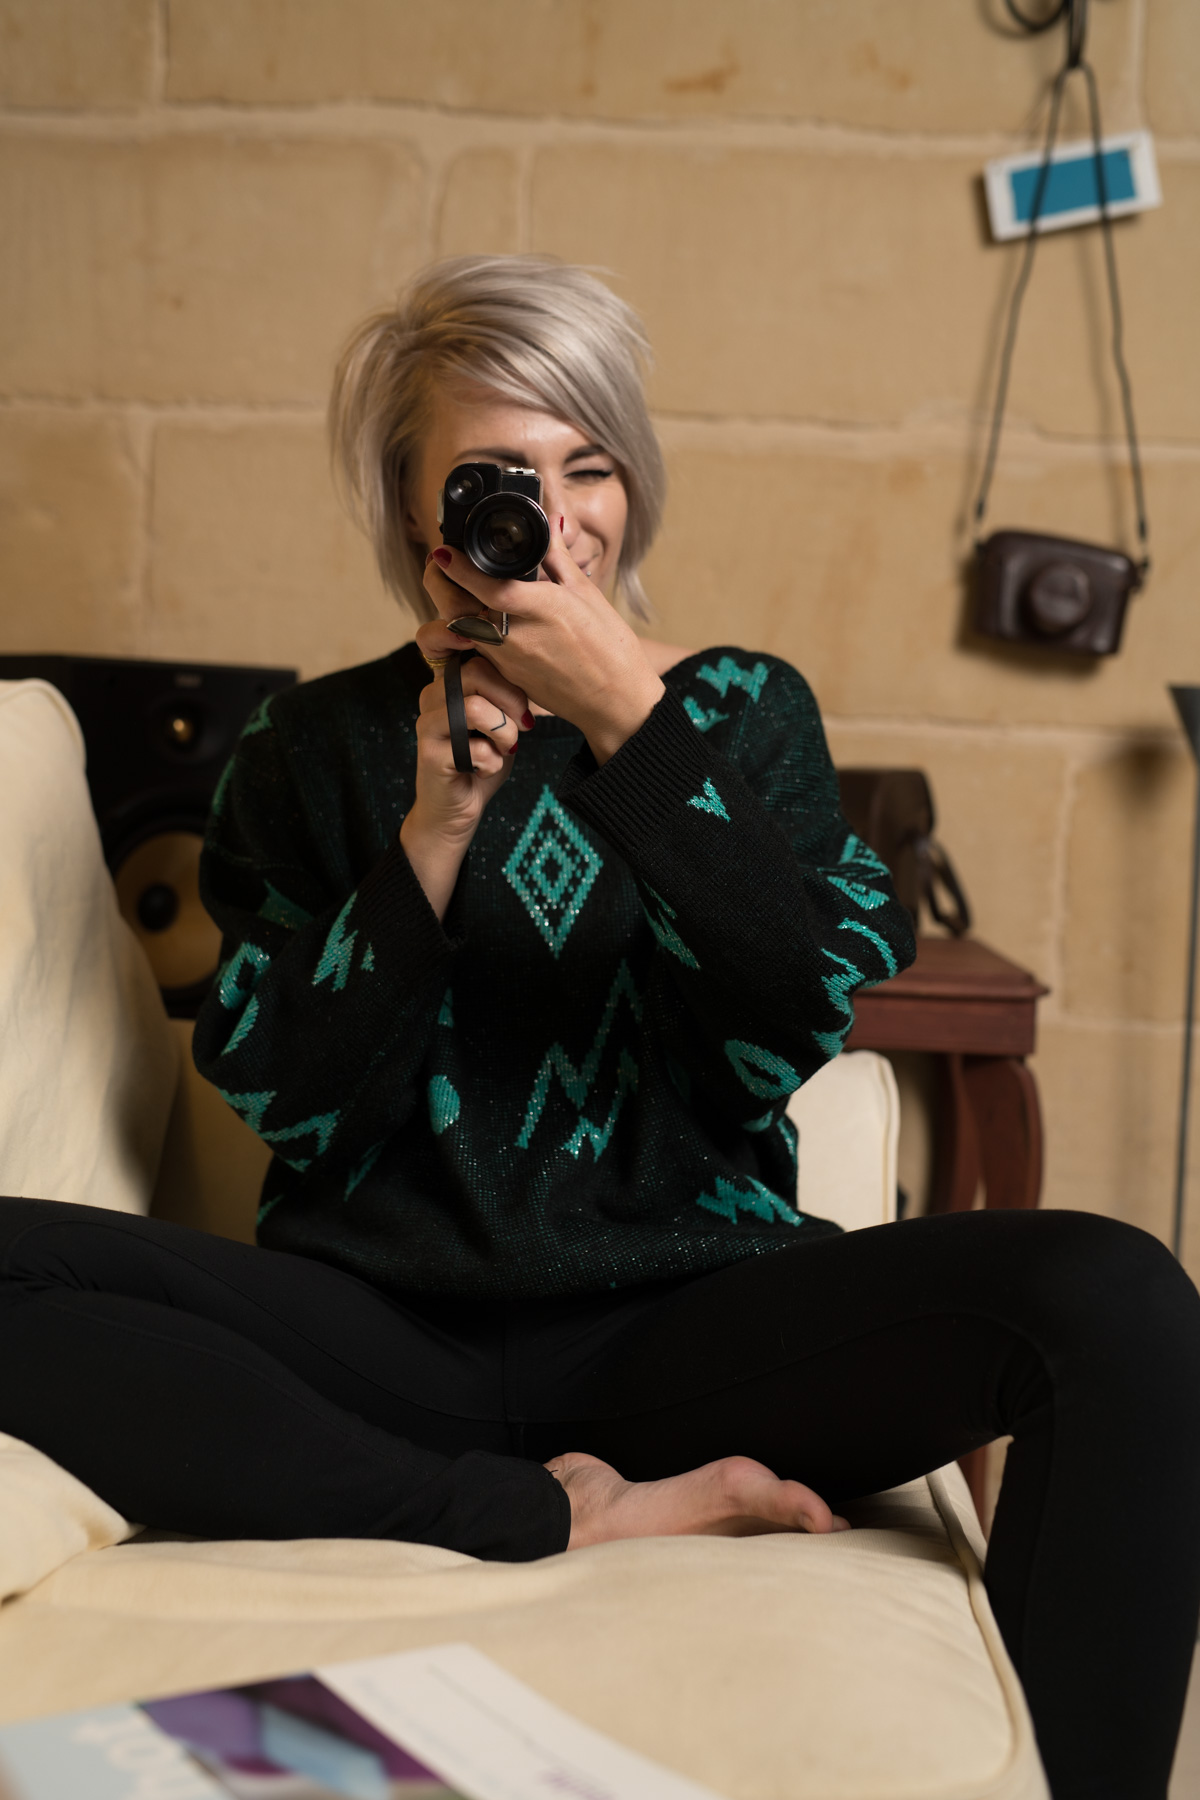 Model, Sacha, wearing the retro black and green sweater and looking through a vintage camera.